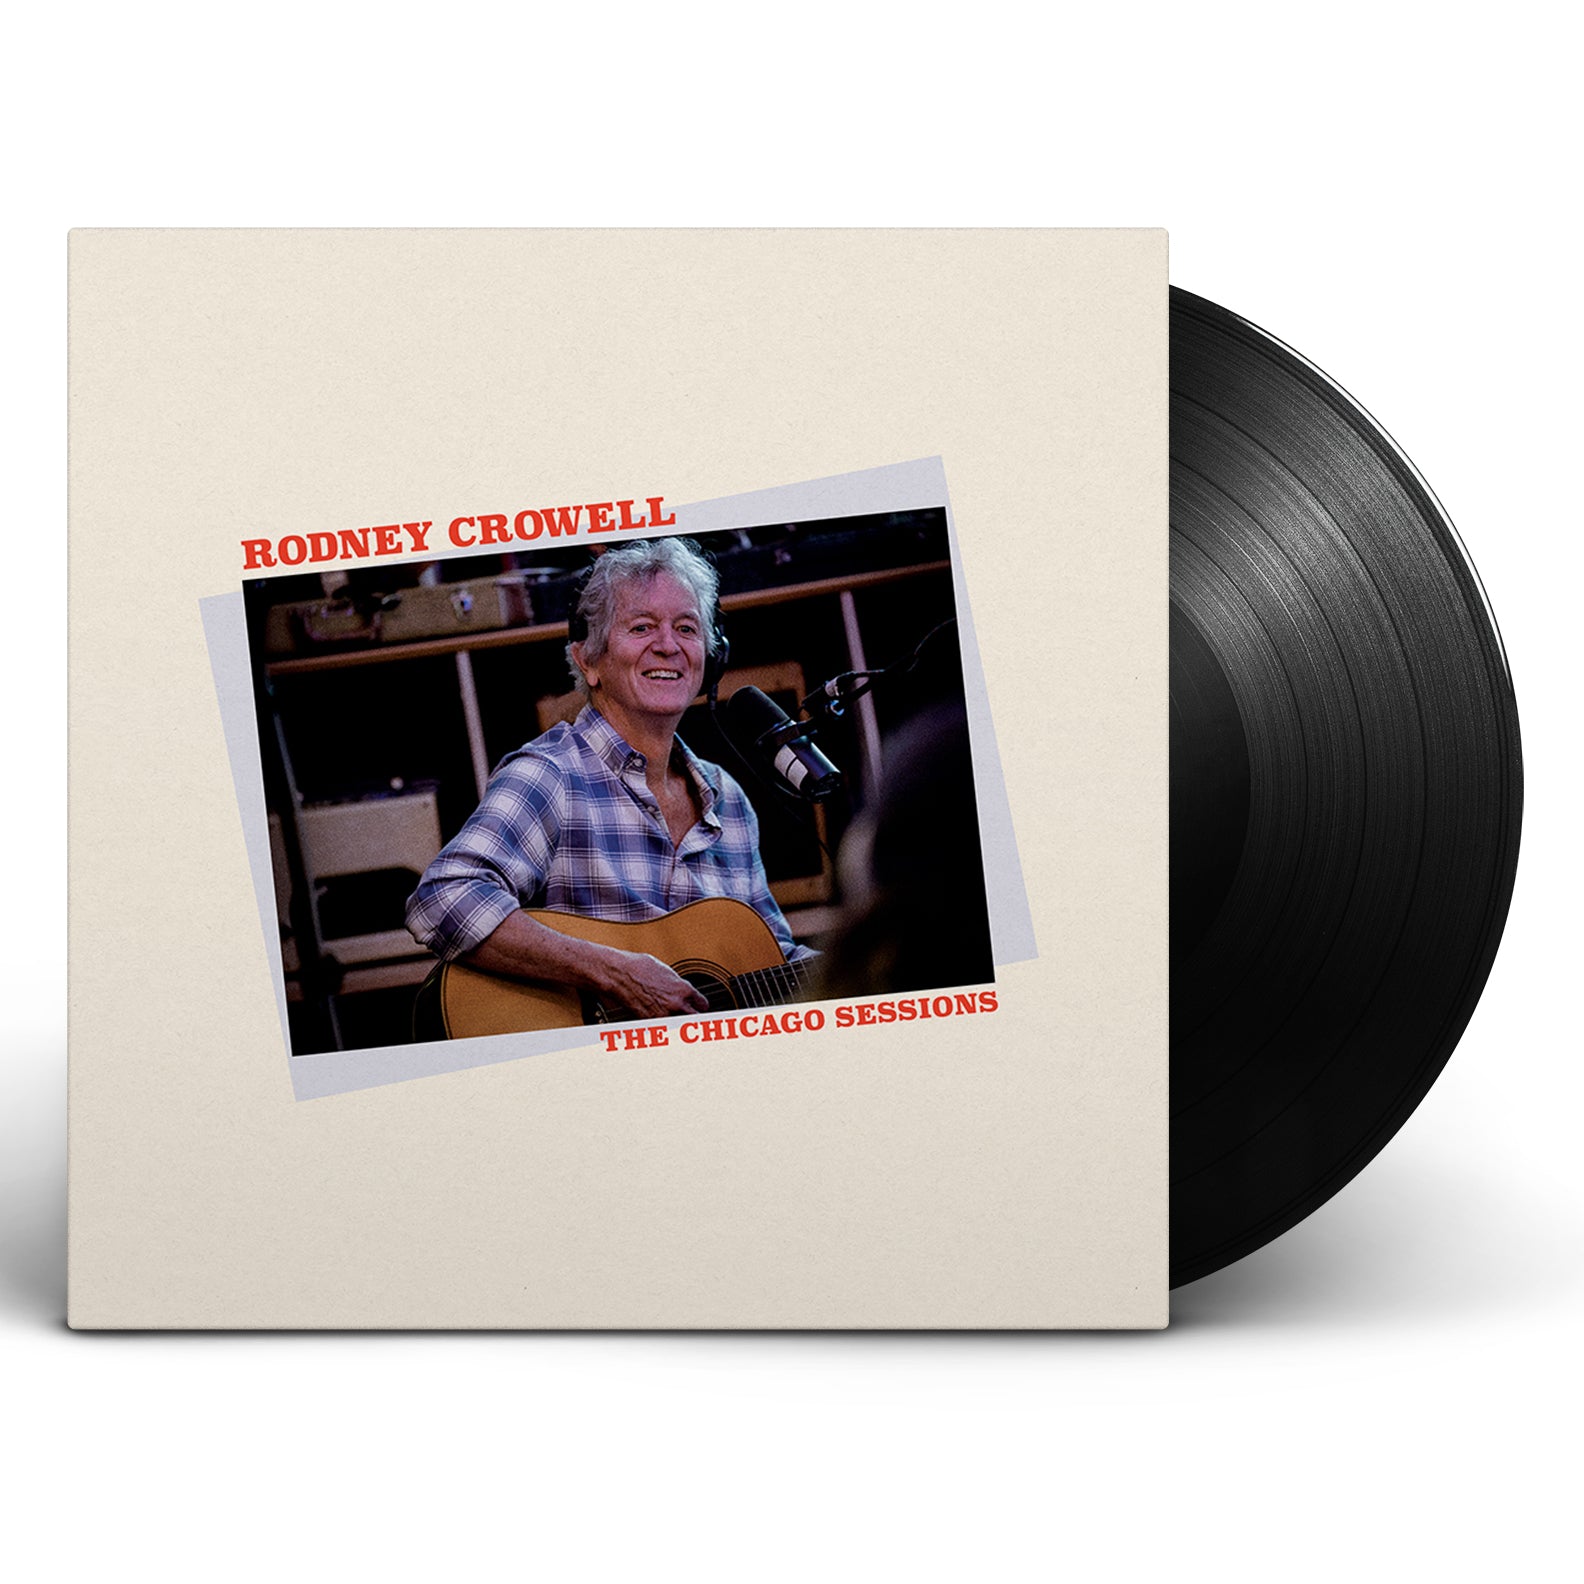 Rodney Crowell - The Chicago Sessions [Vinyl]